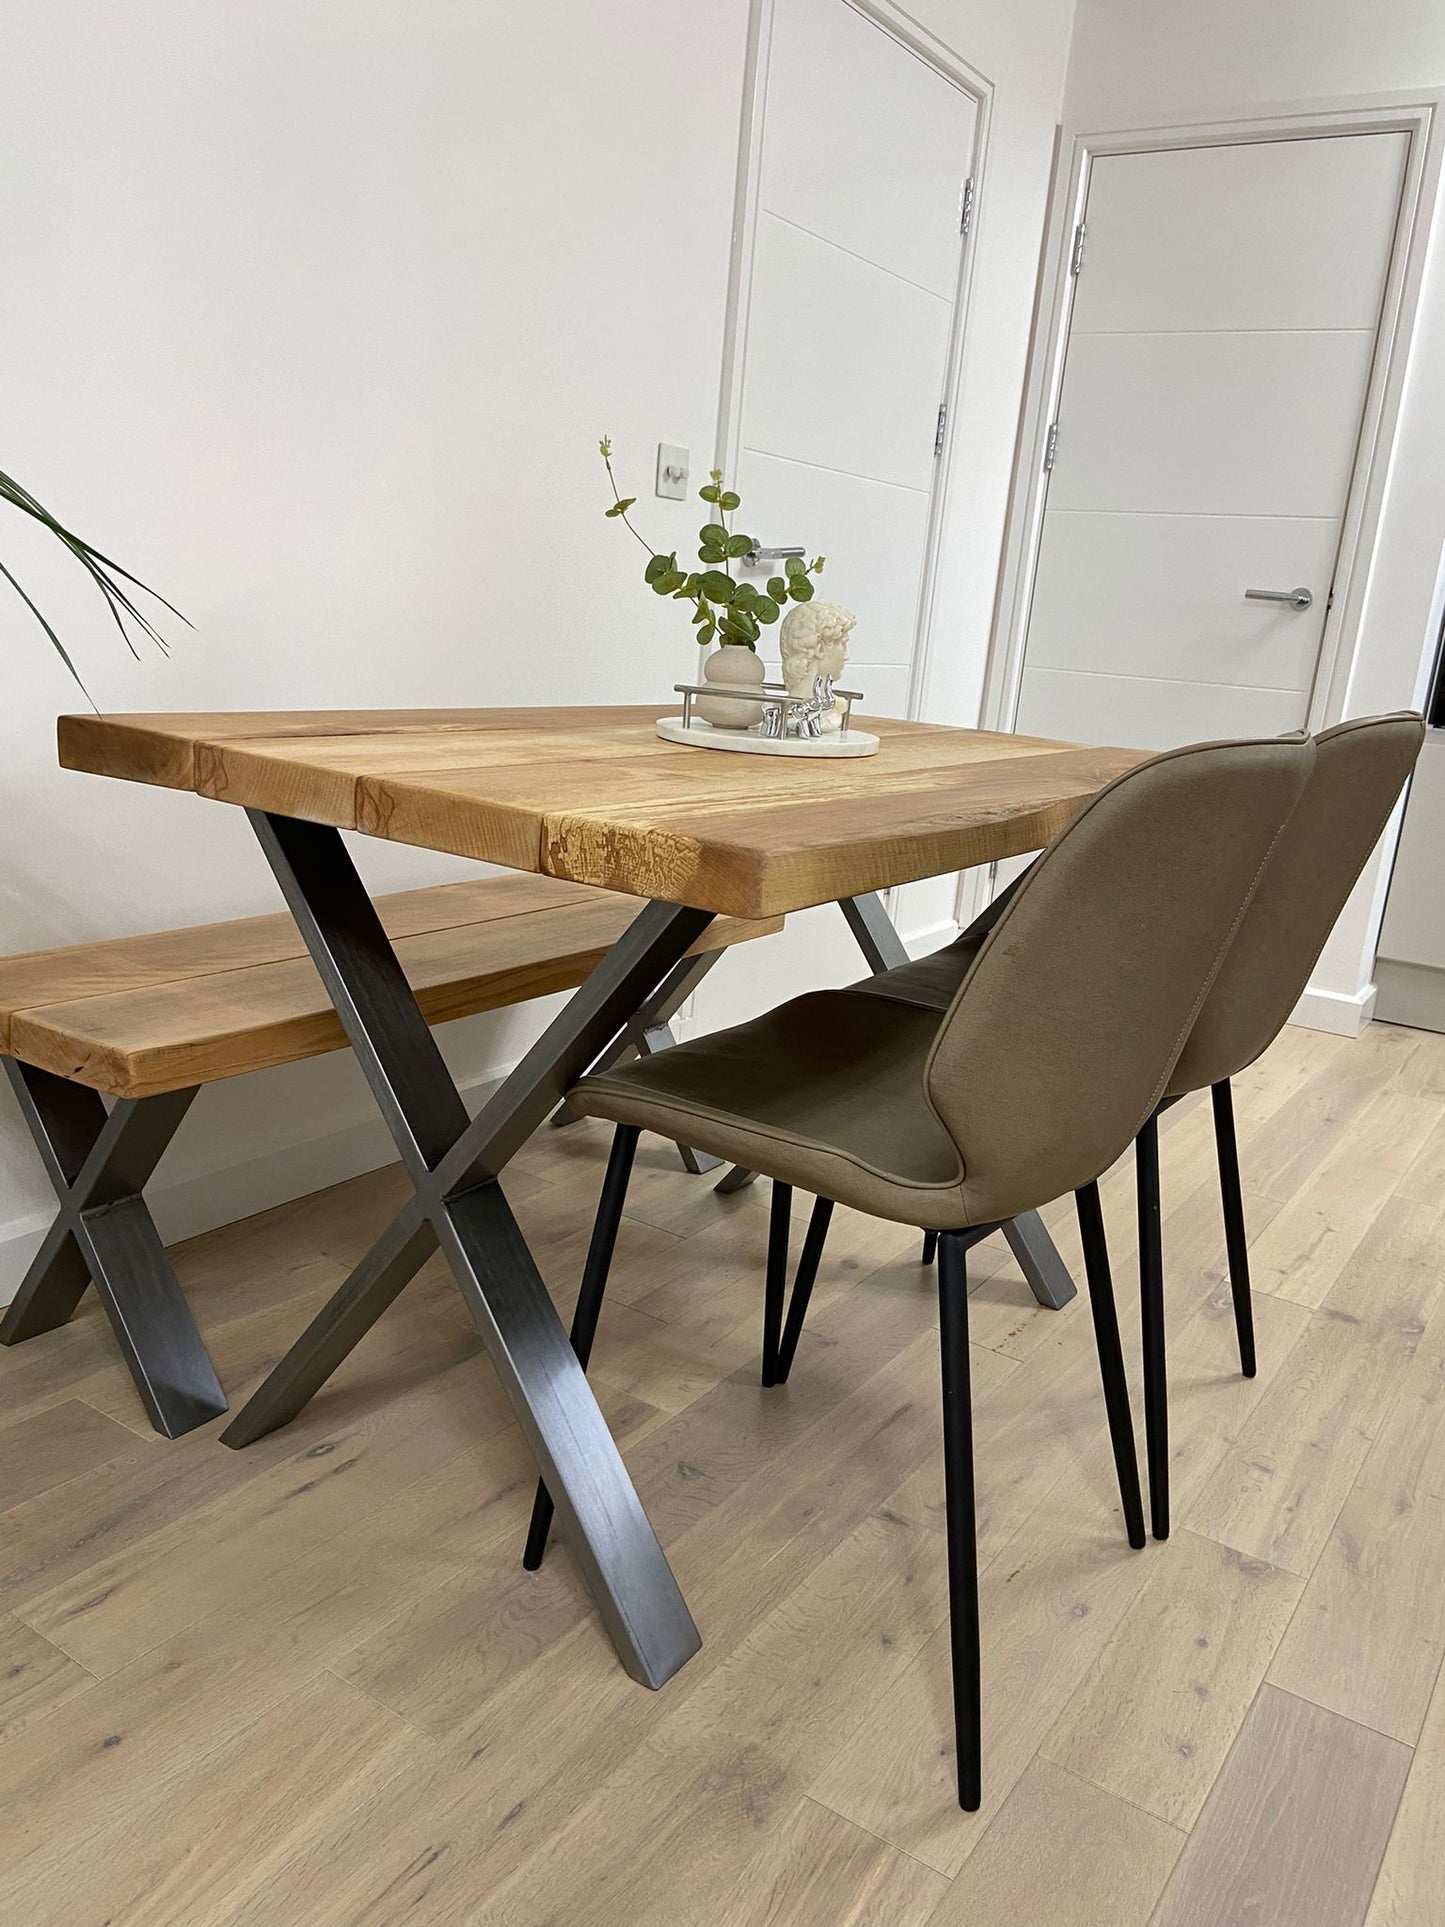 Solid oak table with X shape legs